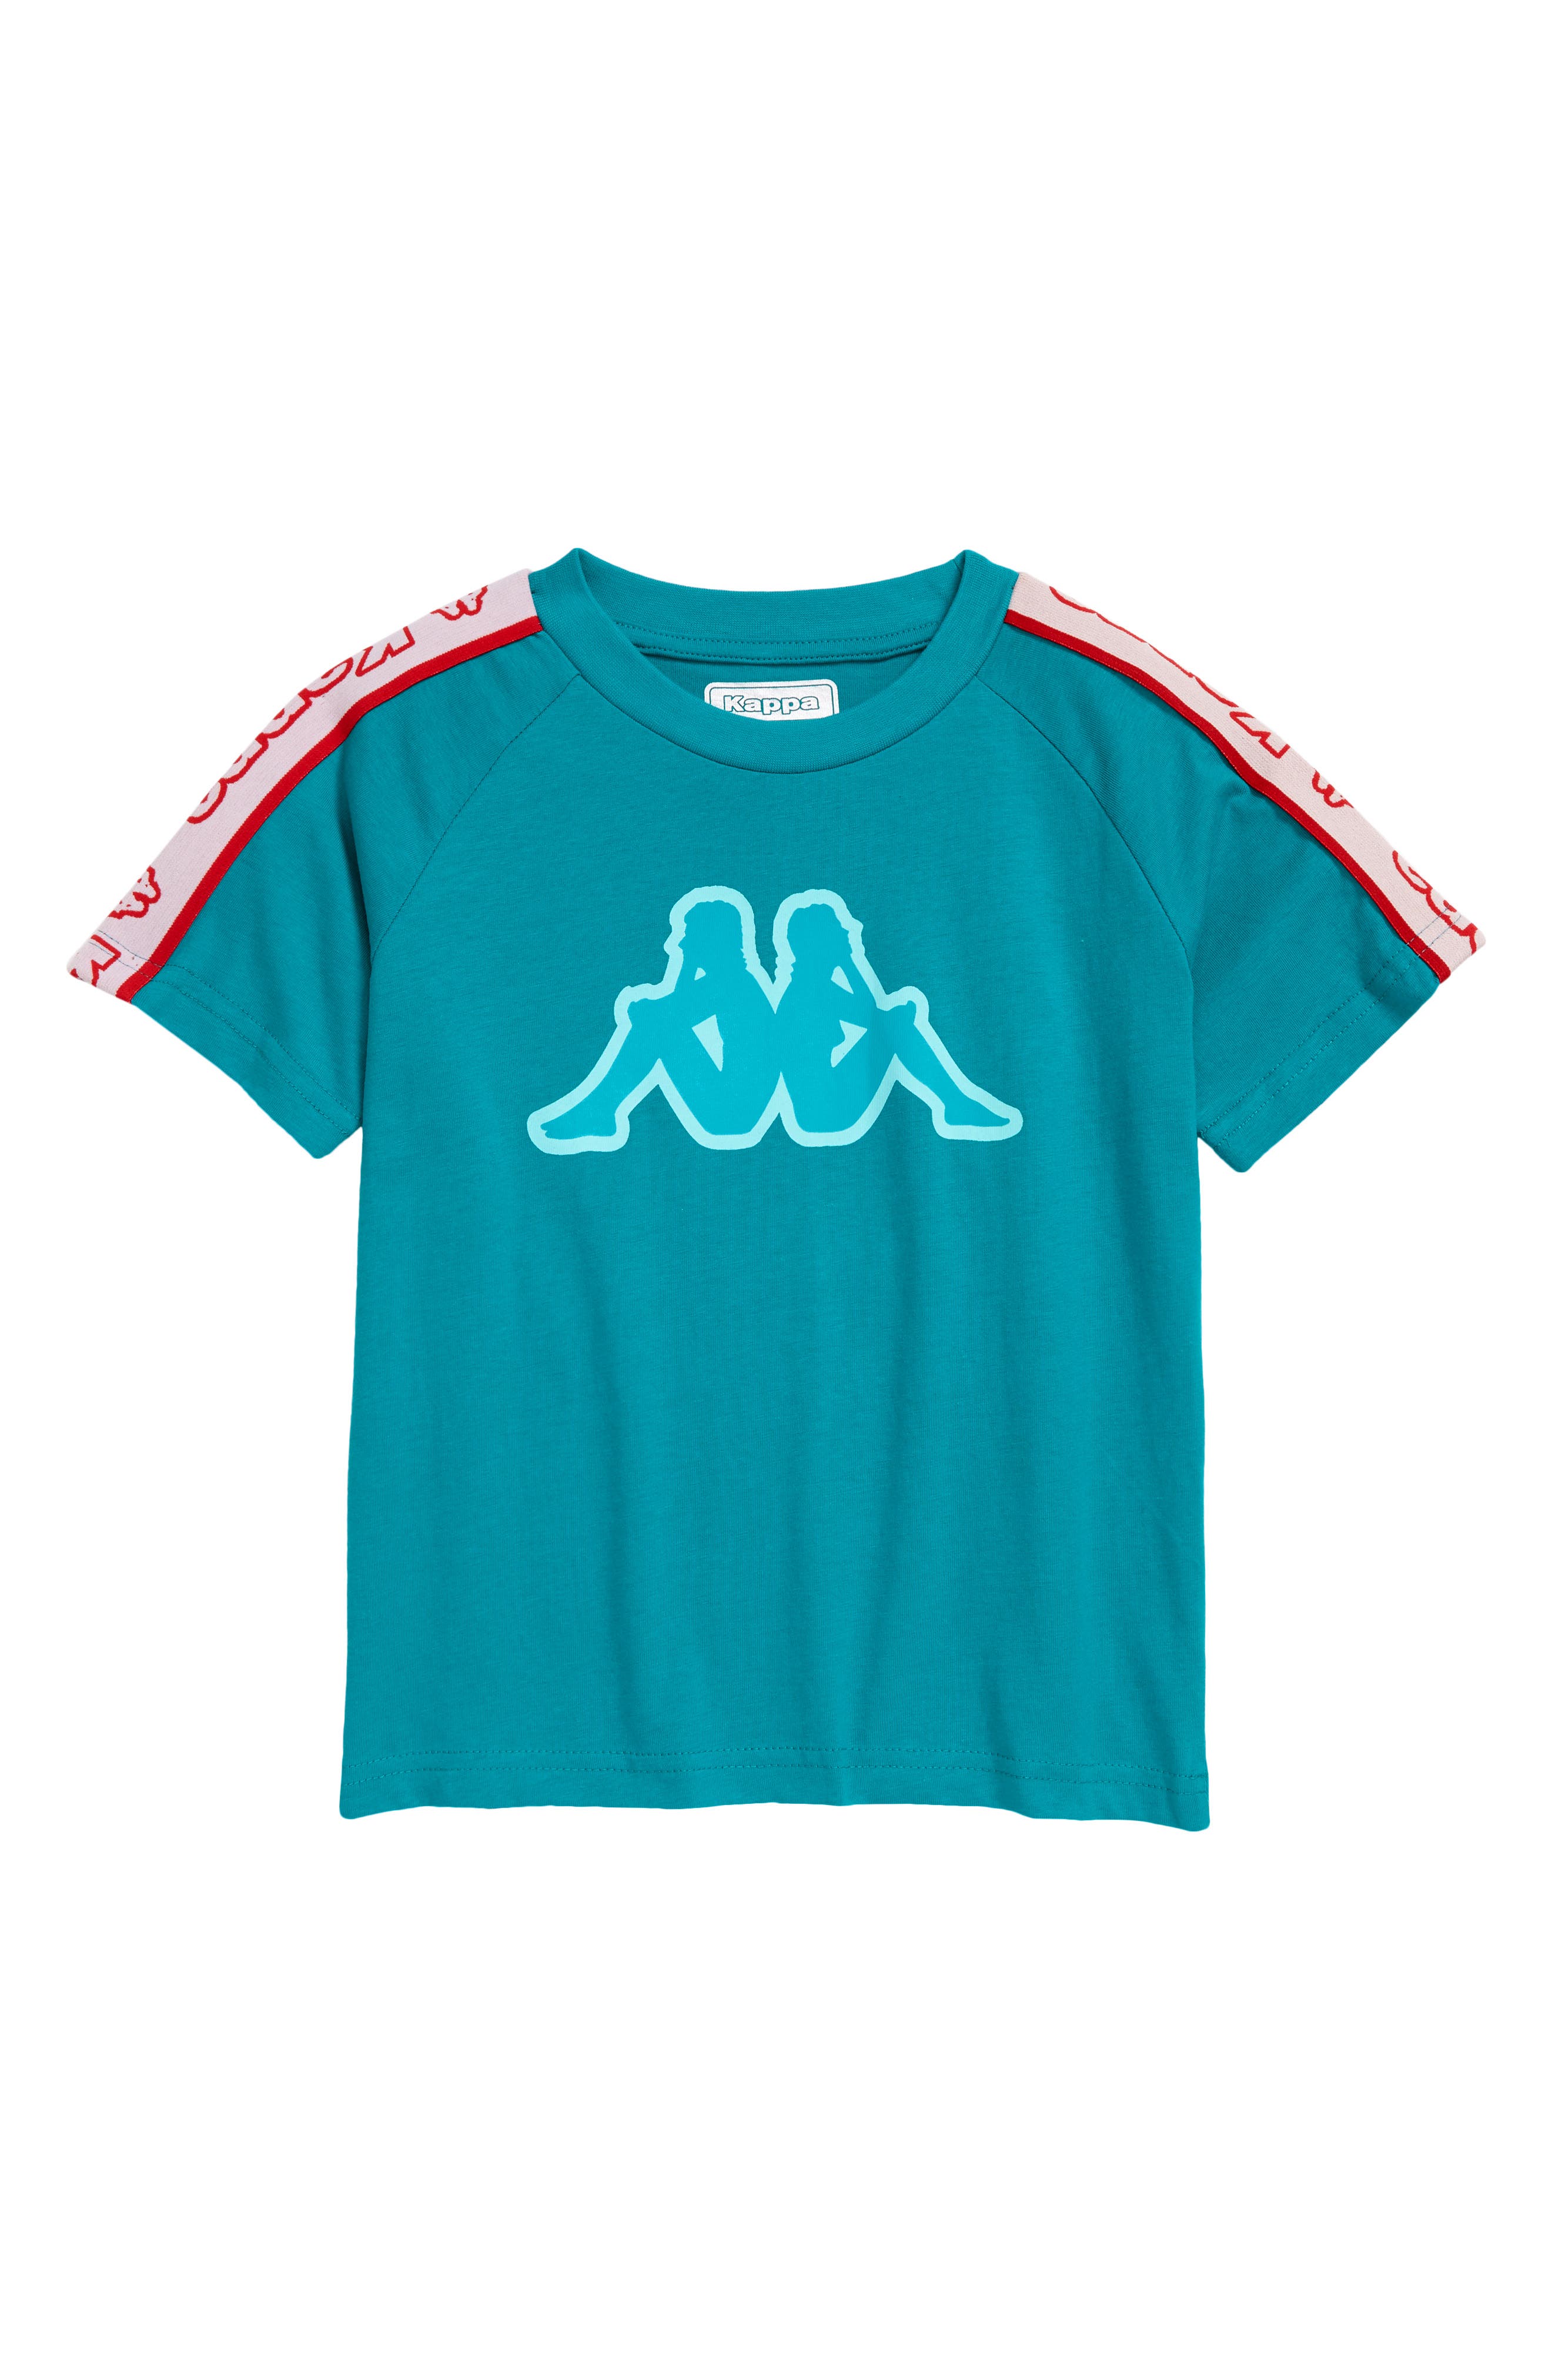 Kappa Kids' Avirec-2 Logo Tape Cotton Graphic Tee in Blue-Bright-Red-Green at Nordstrom, Size 12Y Us